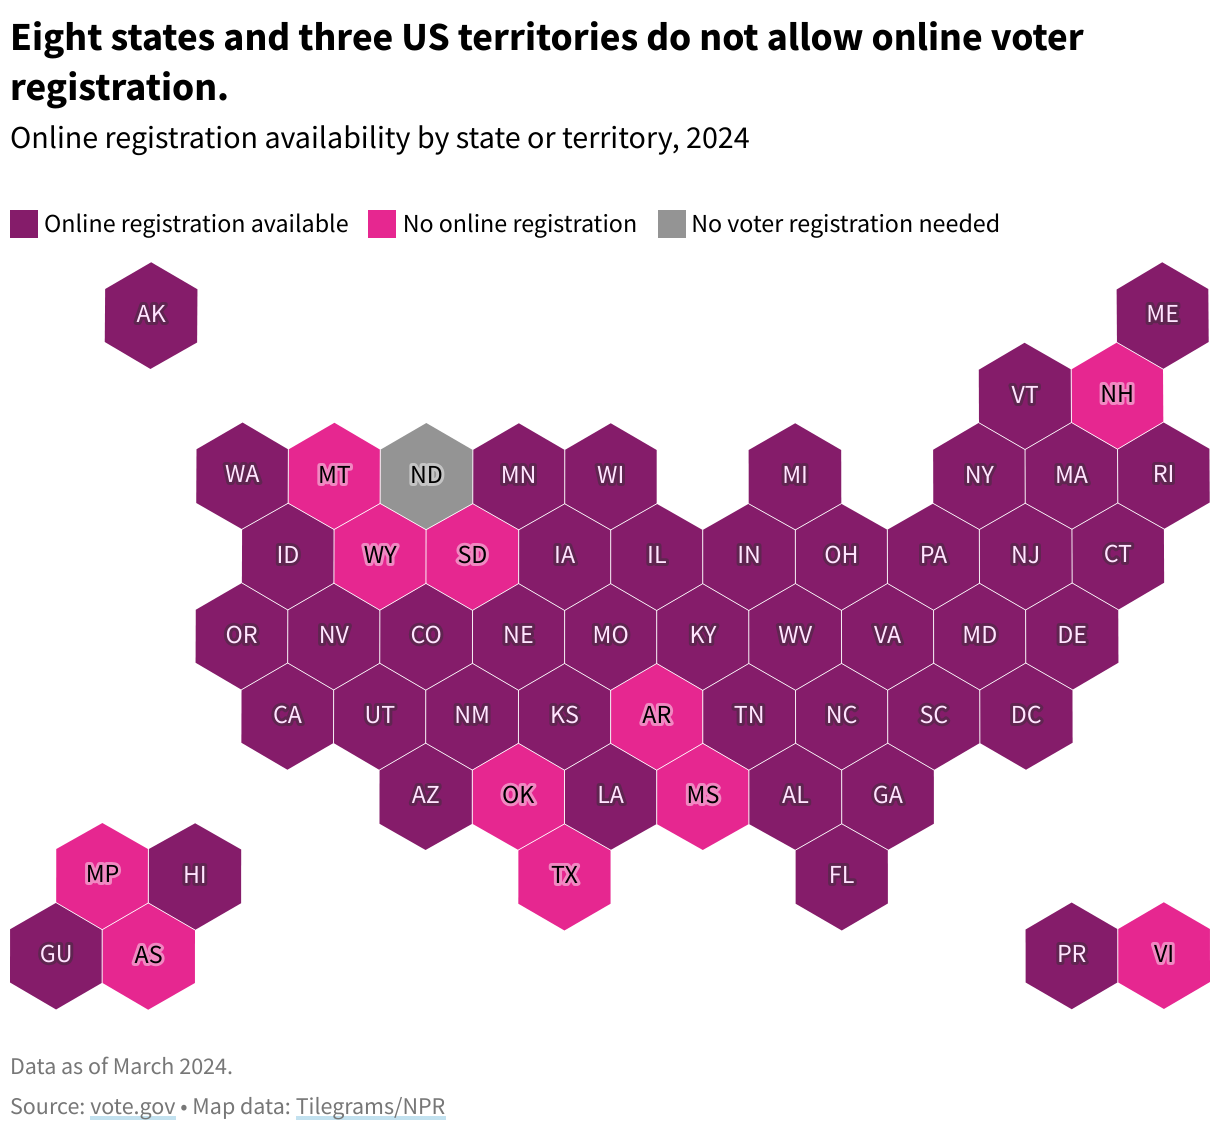 Hex map showing online registration availability by state